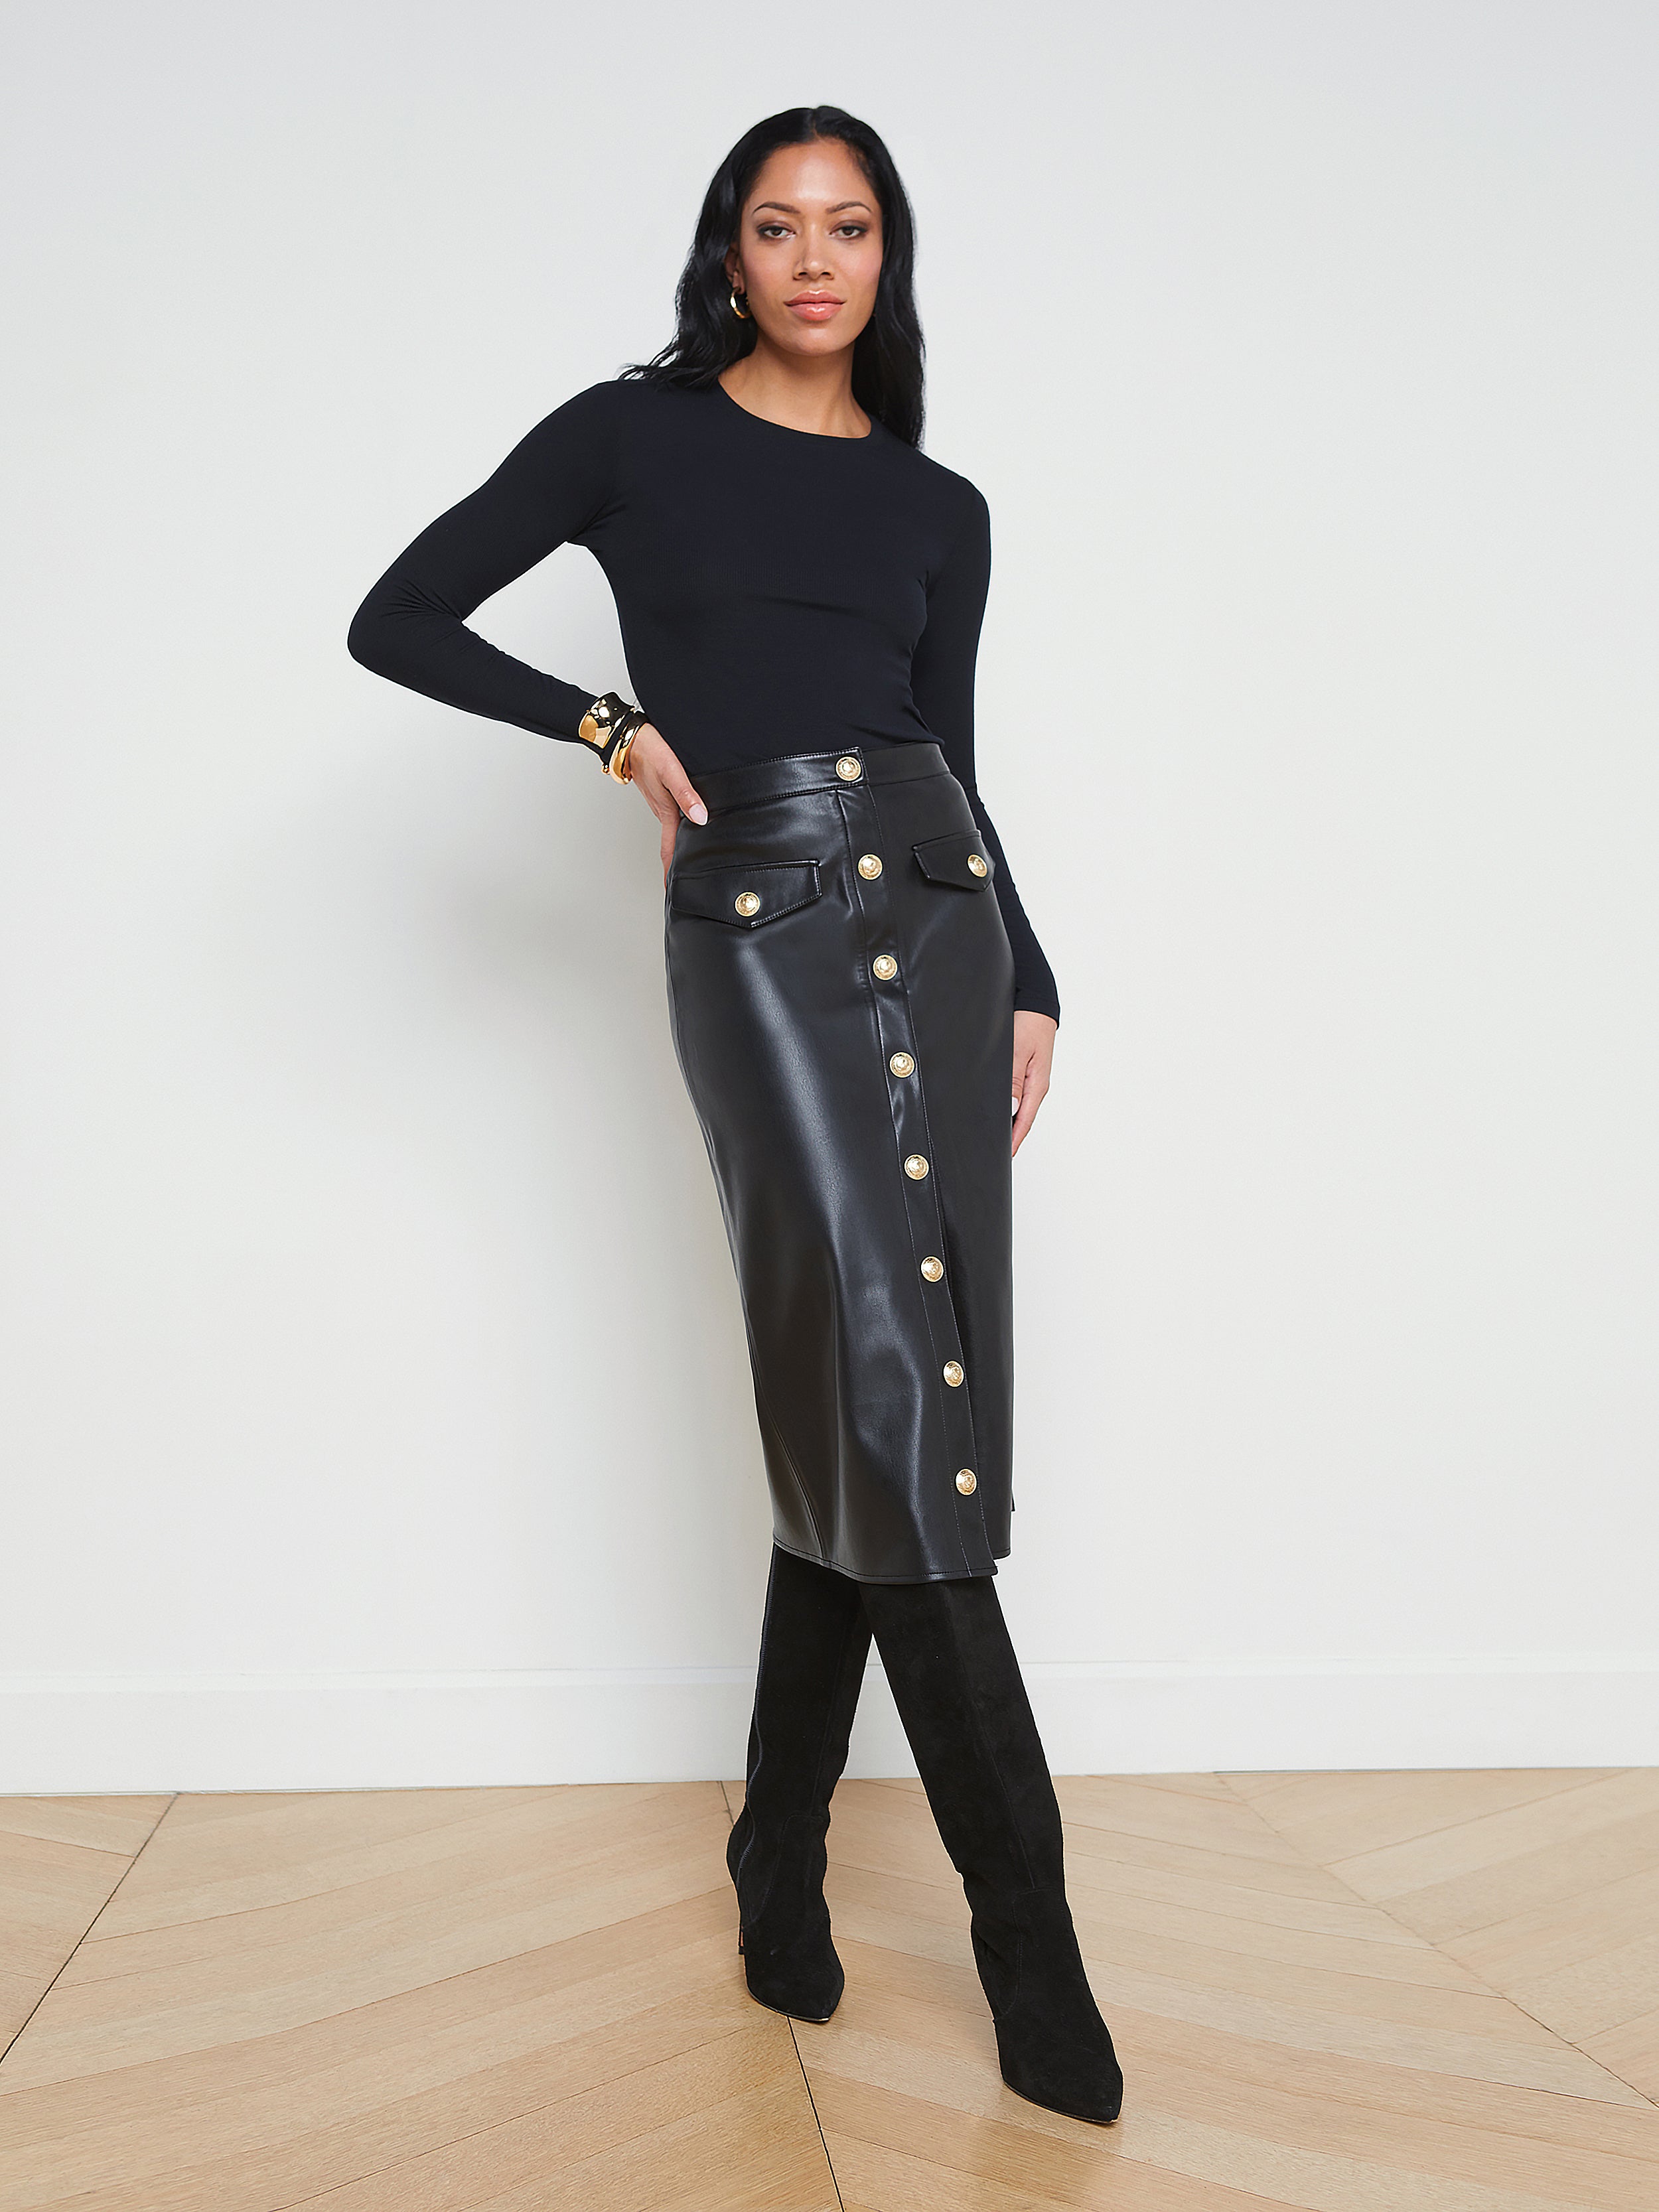 Featured: Milann Faux Leather Skirt